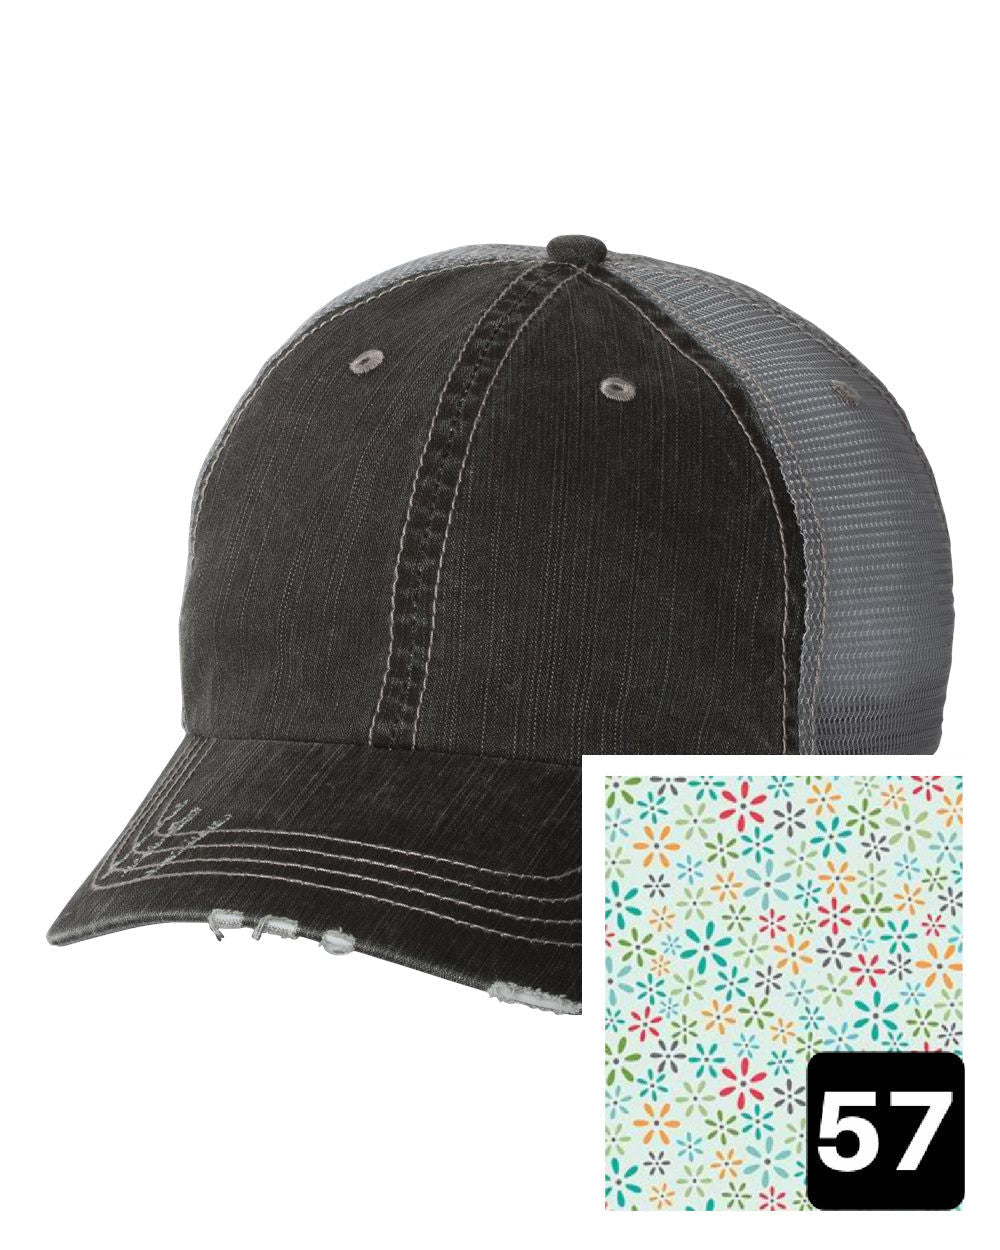 gray distressed trucker hat with white daisy on yellow fabric state of North Carolina